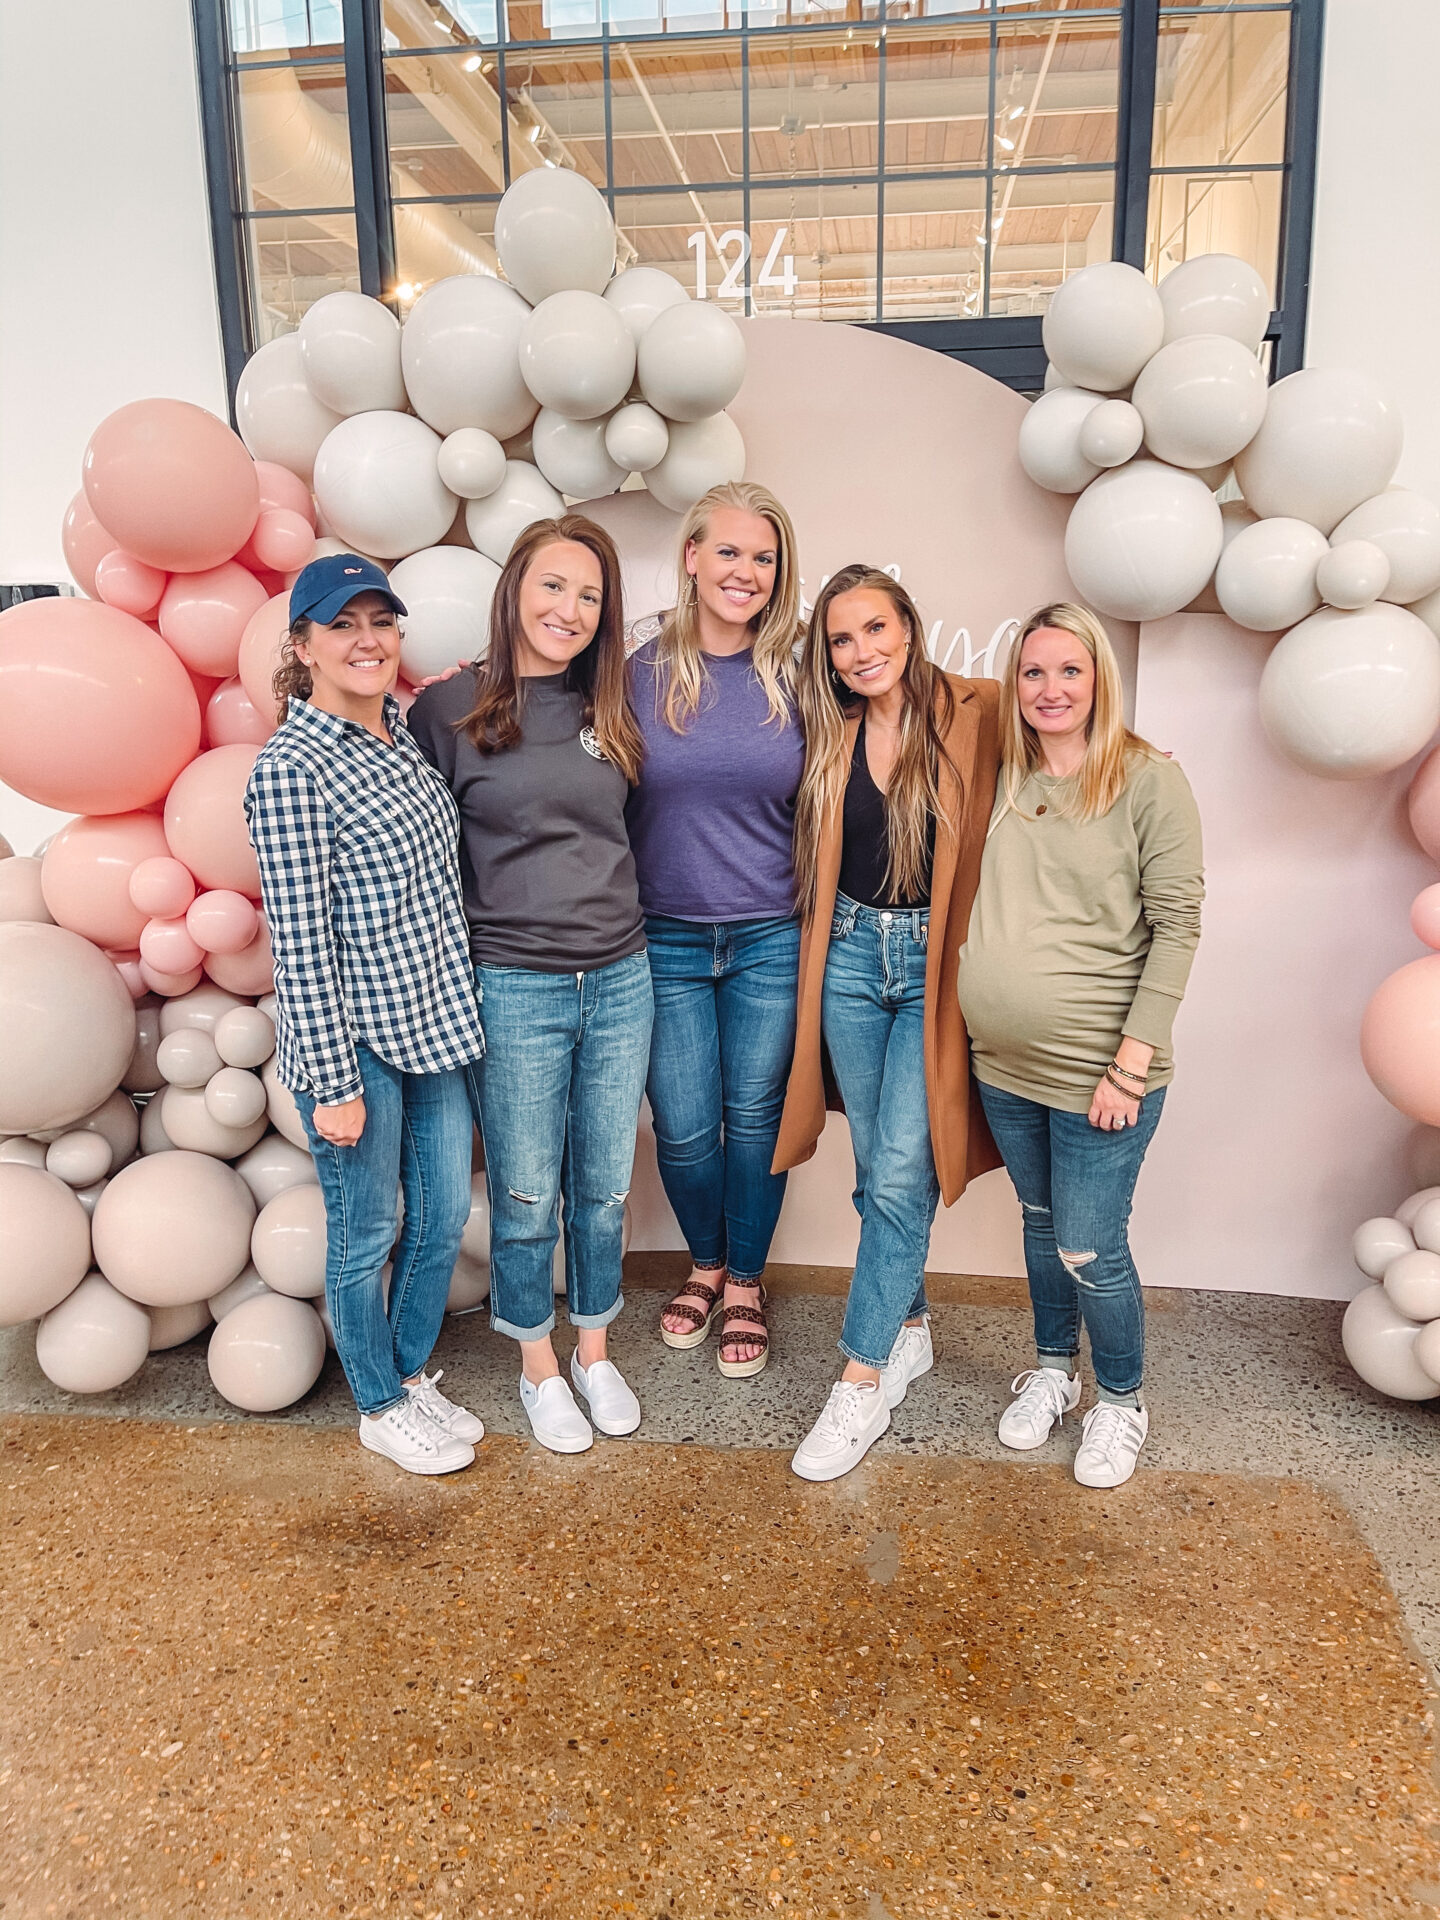 lifestyle blogger Angela Lanter at Nashville shopping mall in front of balloon arch with lifelong friends.